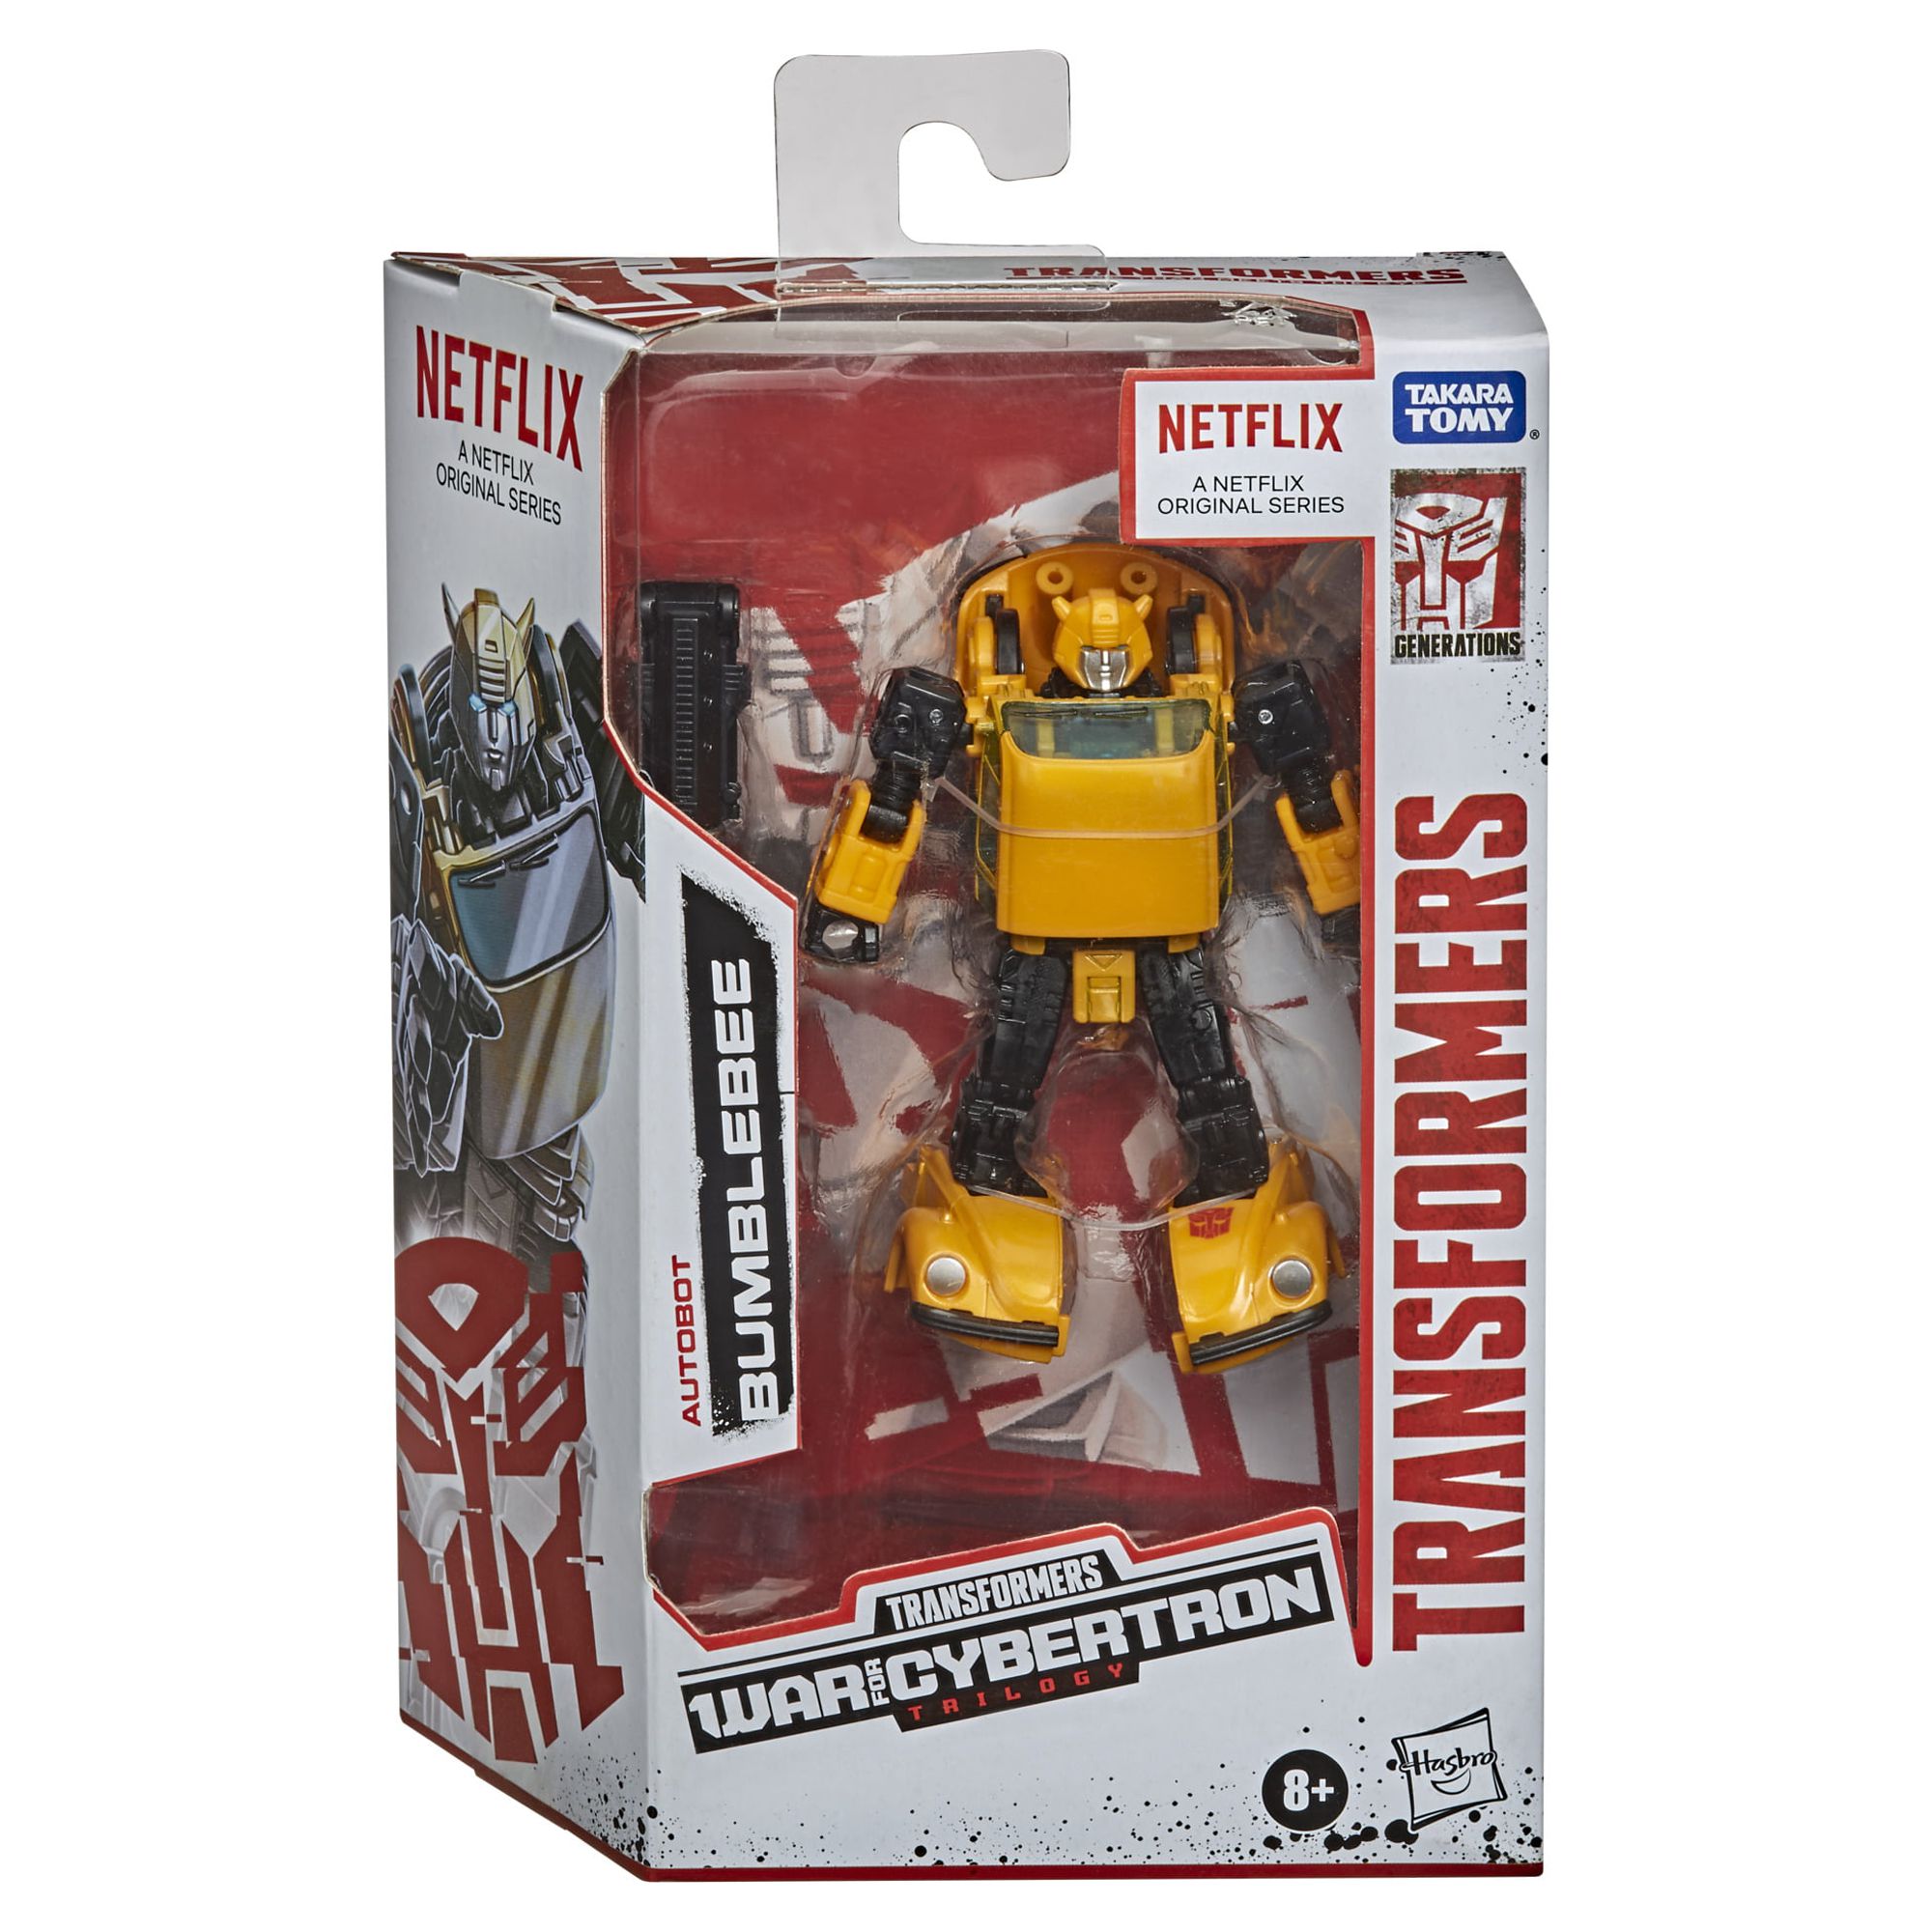 Transformers Generations War for Cybertron Trilogy Series-Inspired Deluxe Bumblebee Figure - image 4 of 5